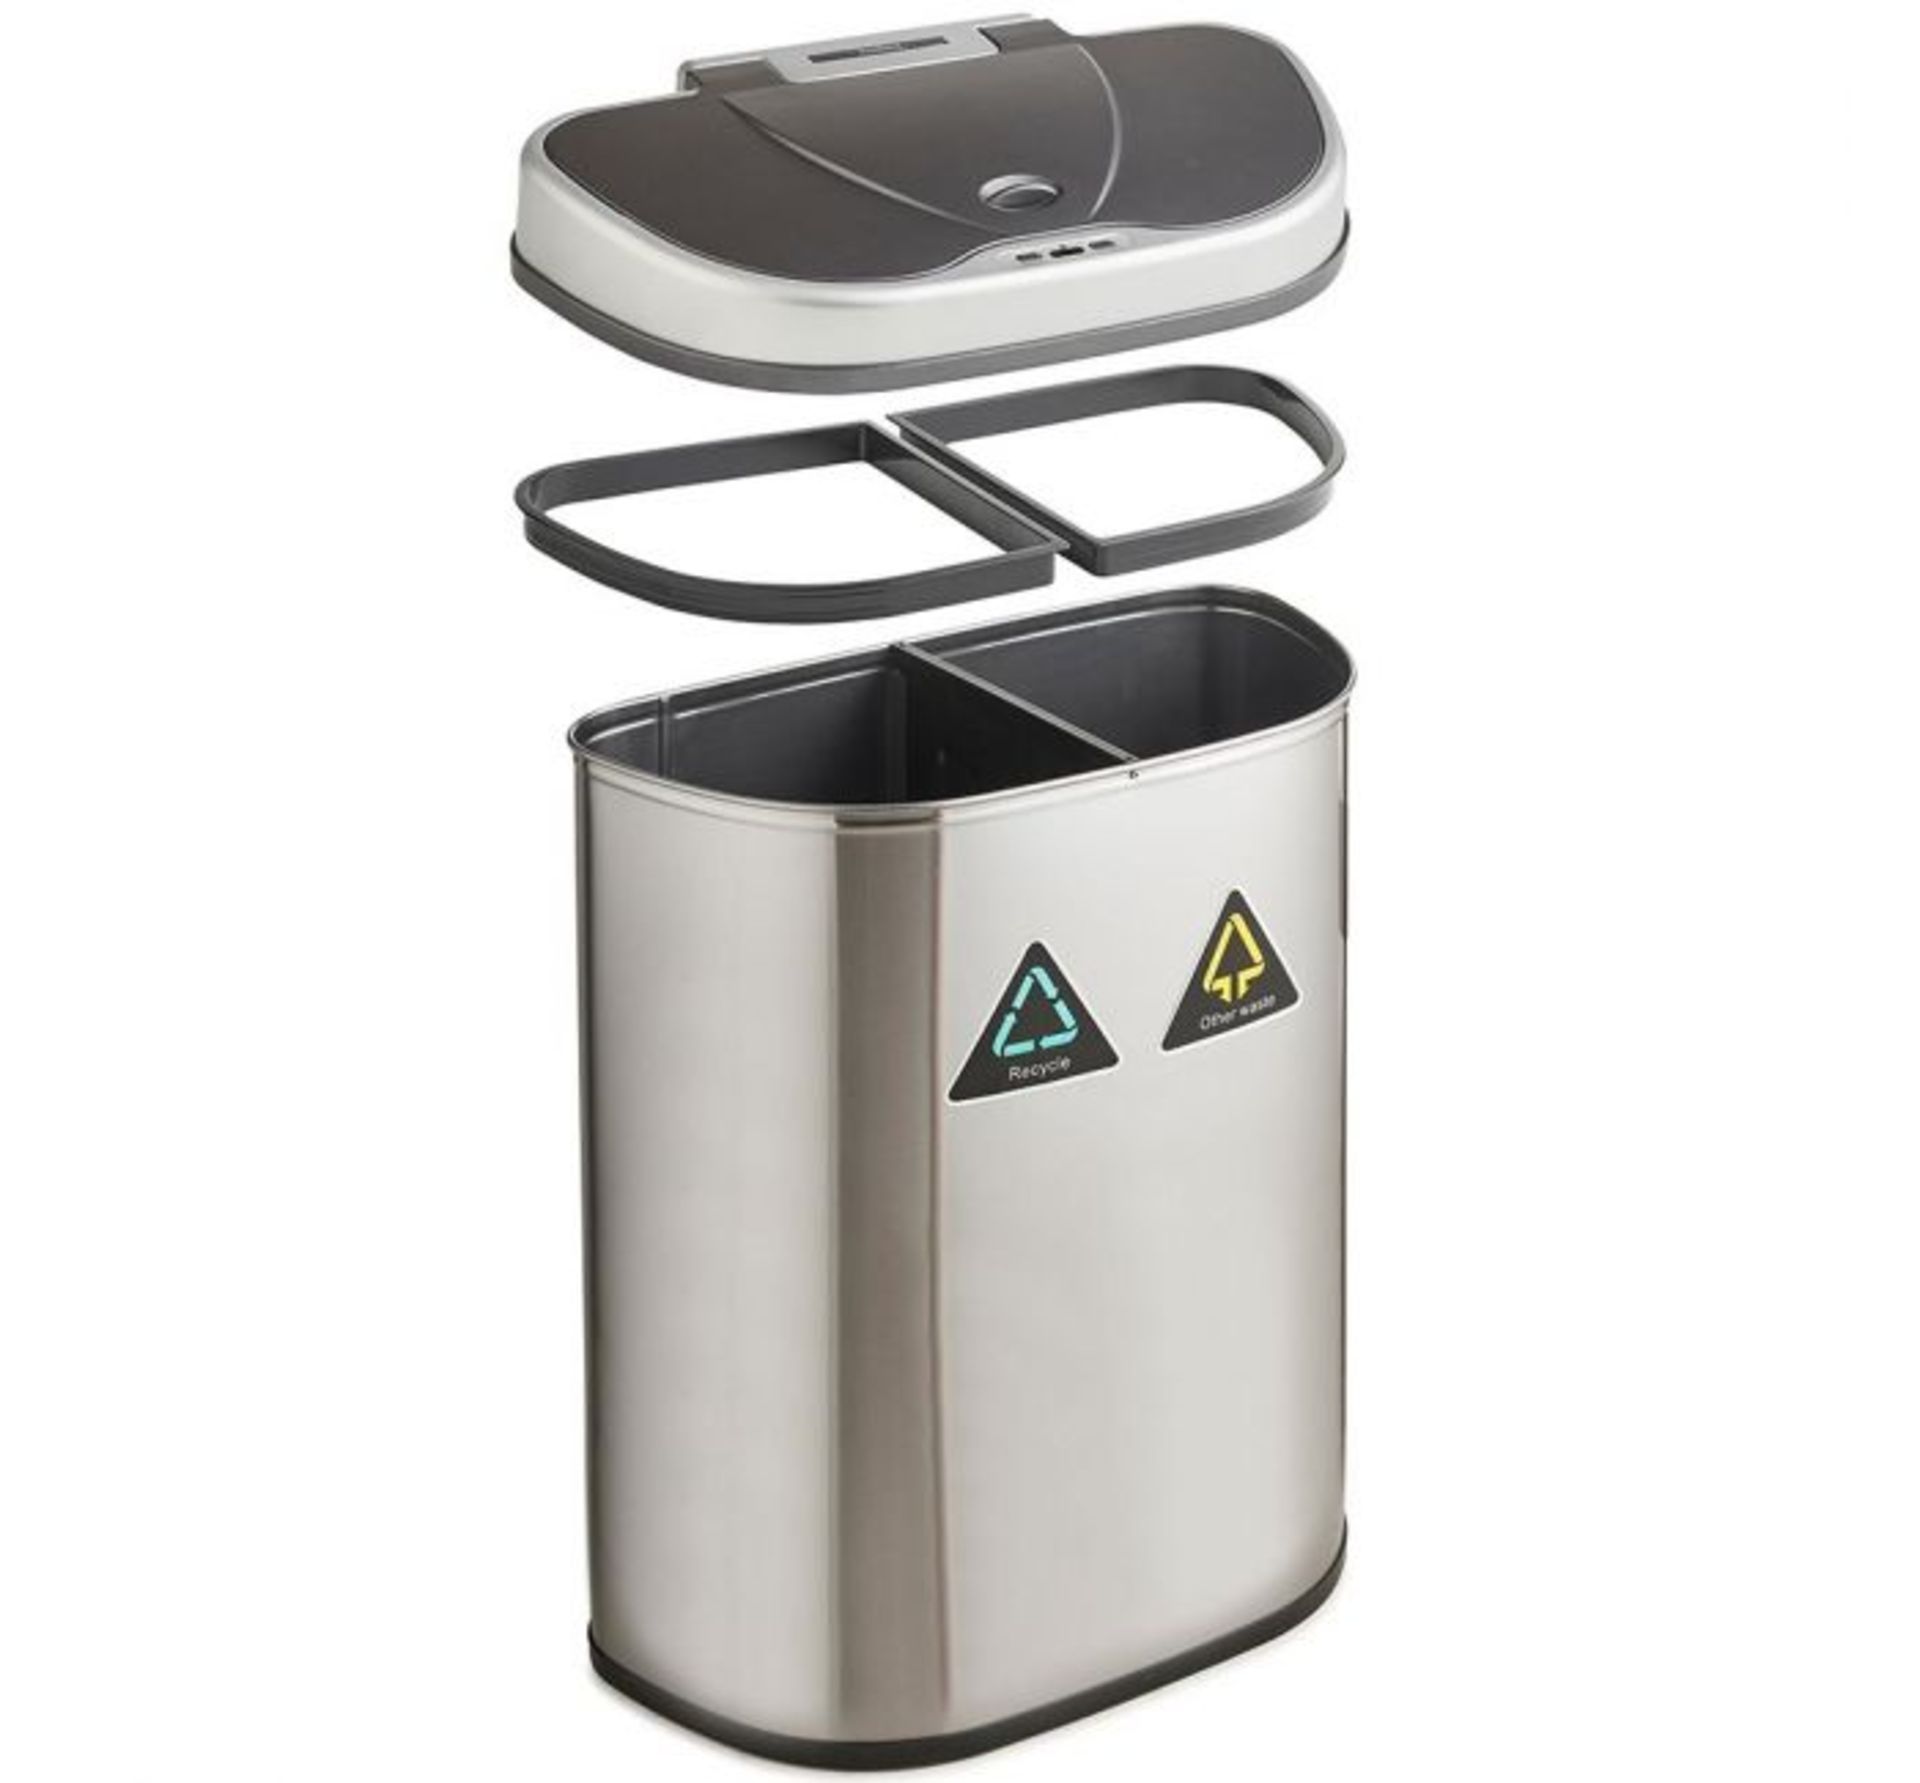 (TD29) 70L Recycling Sensor Bin LED Infrared Sensor opens the lid automatically, so there’s ... - Image 3 of 3